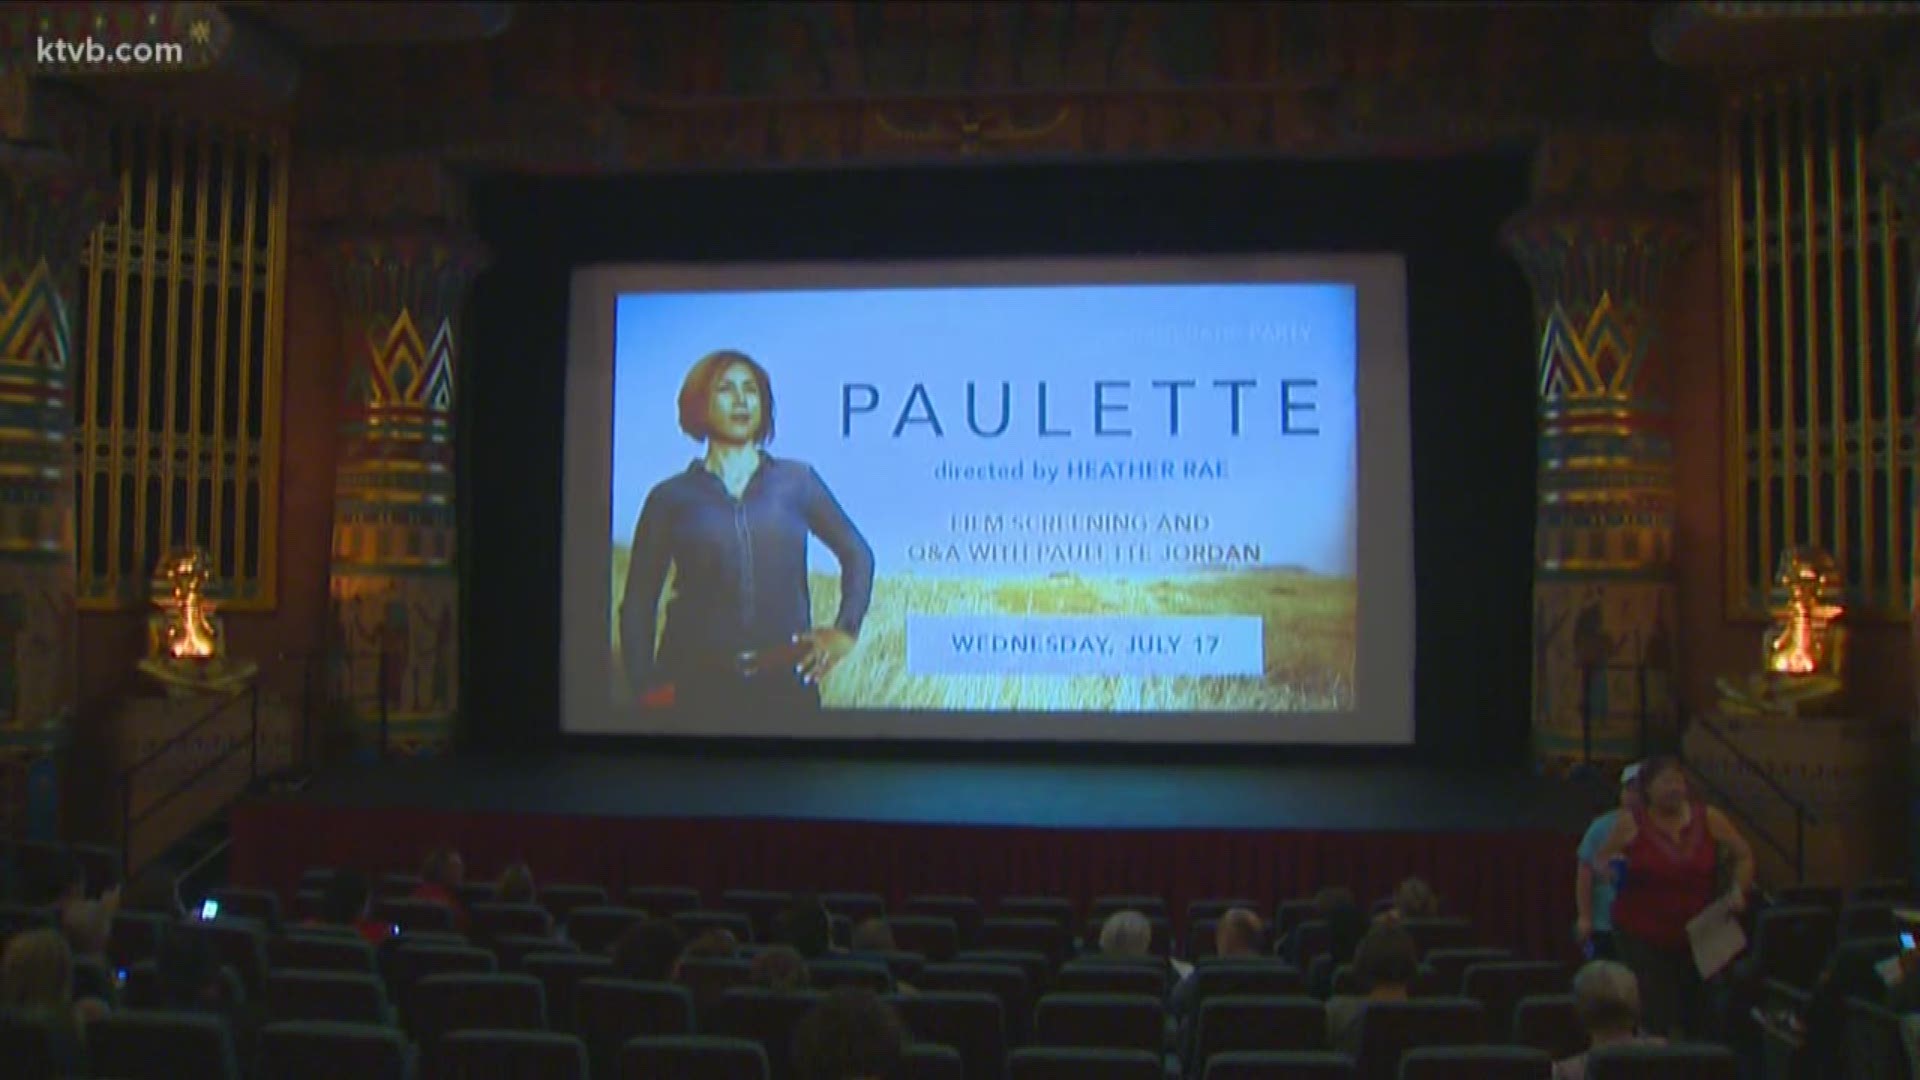 The former Democratic nominee for Idaho governor spoke about her political future during the Boise premiere of the documentary, "Paulette."